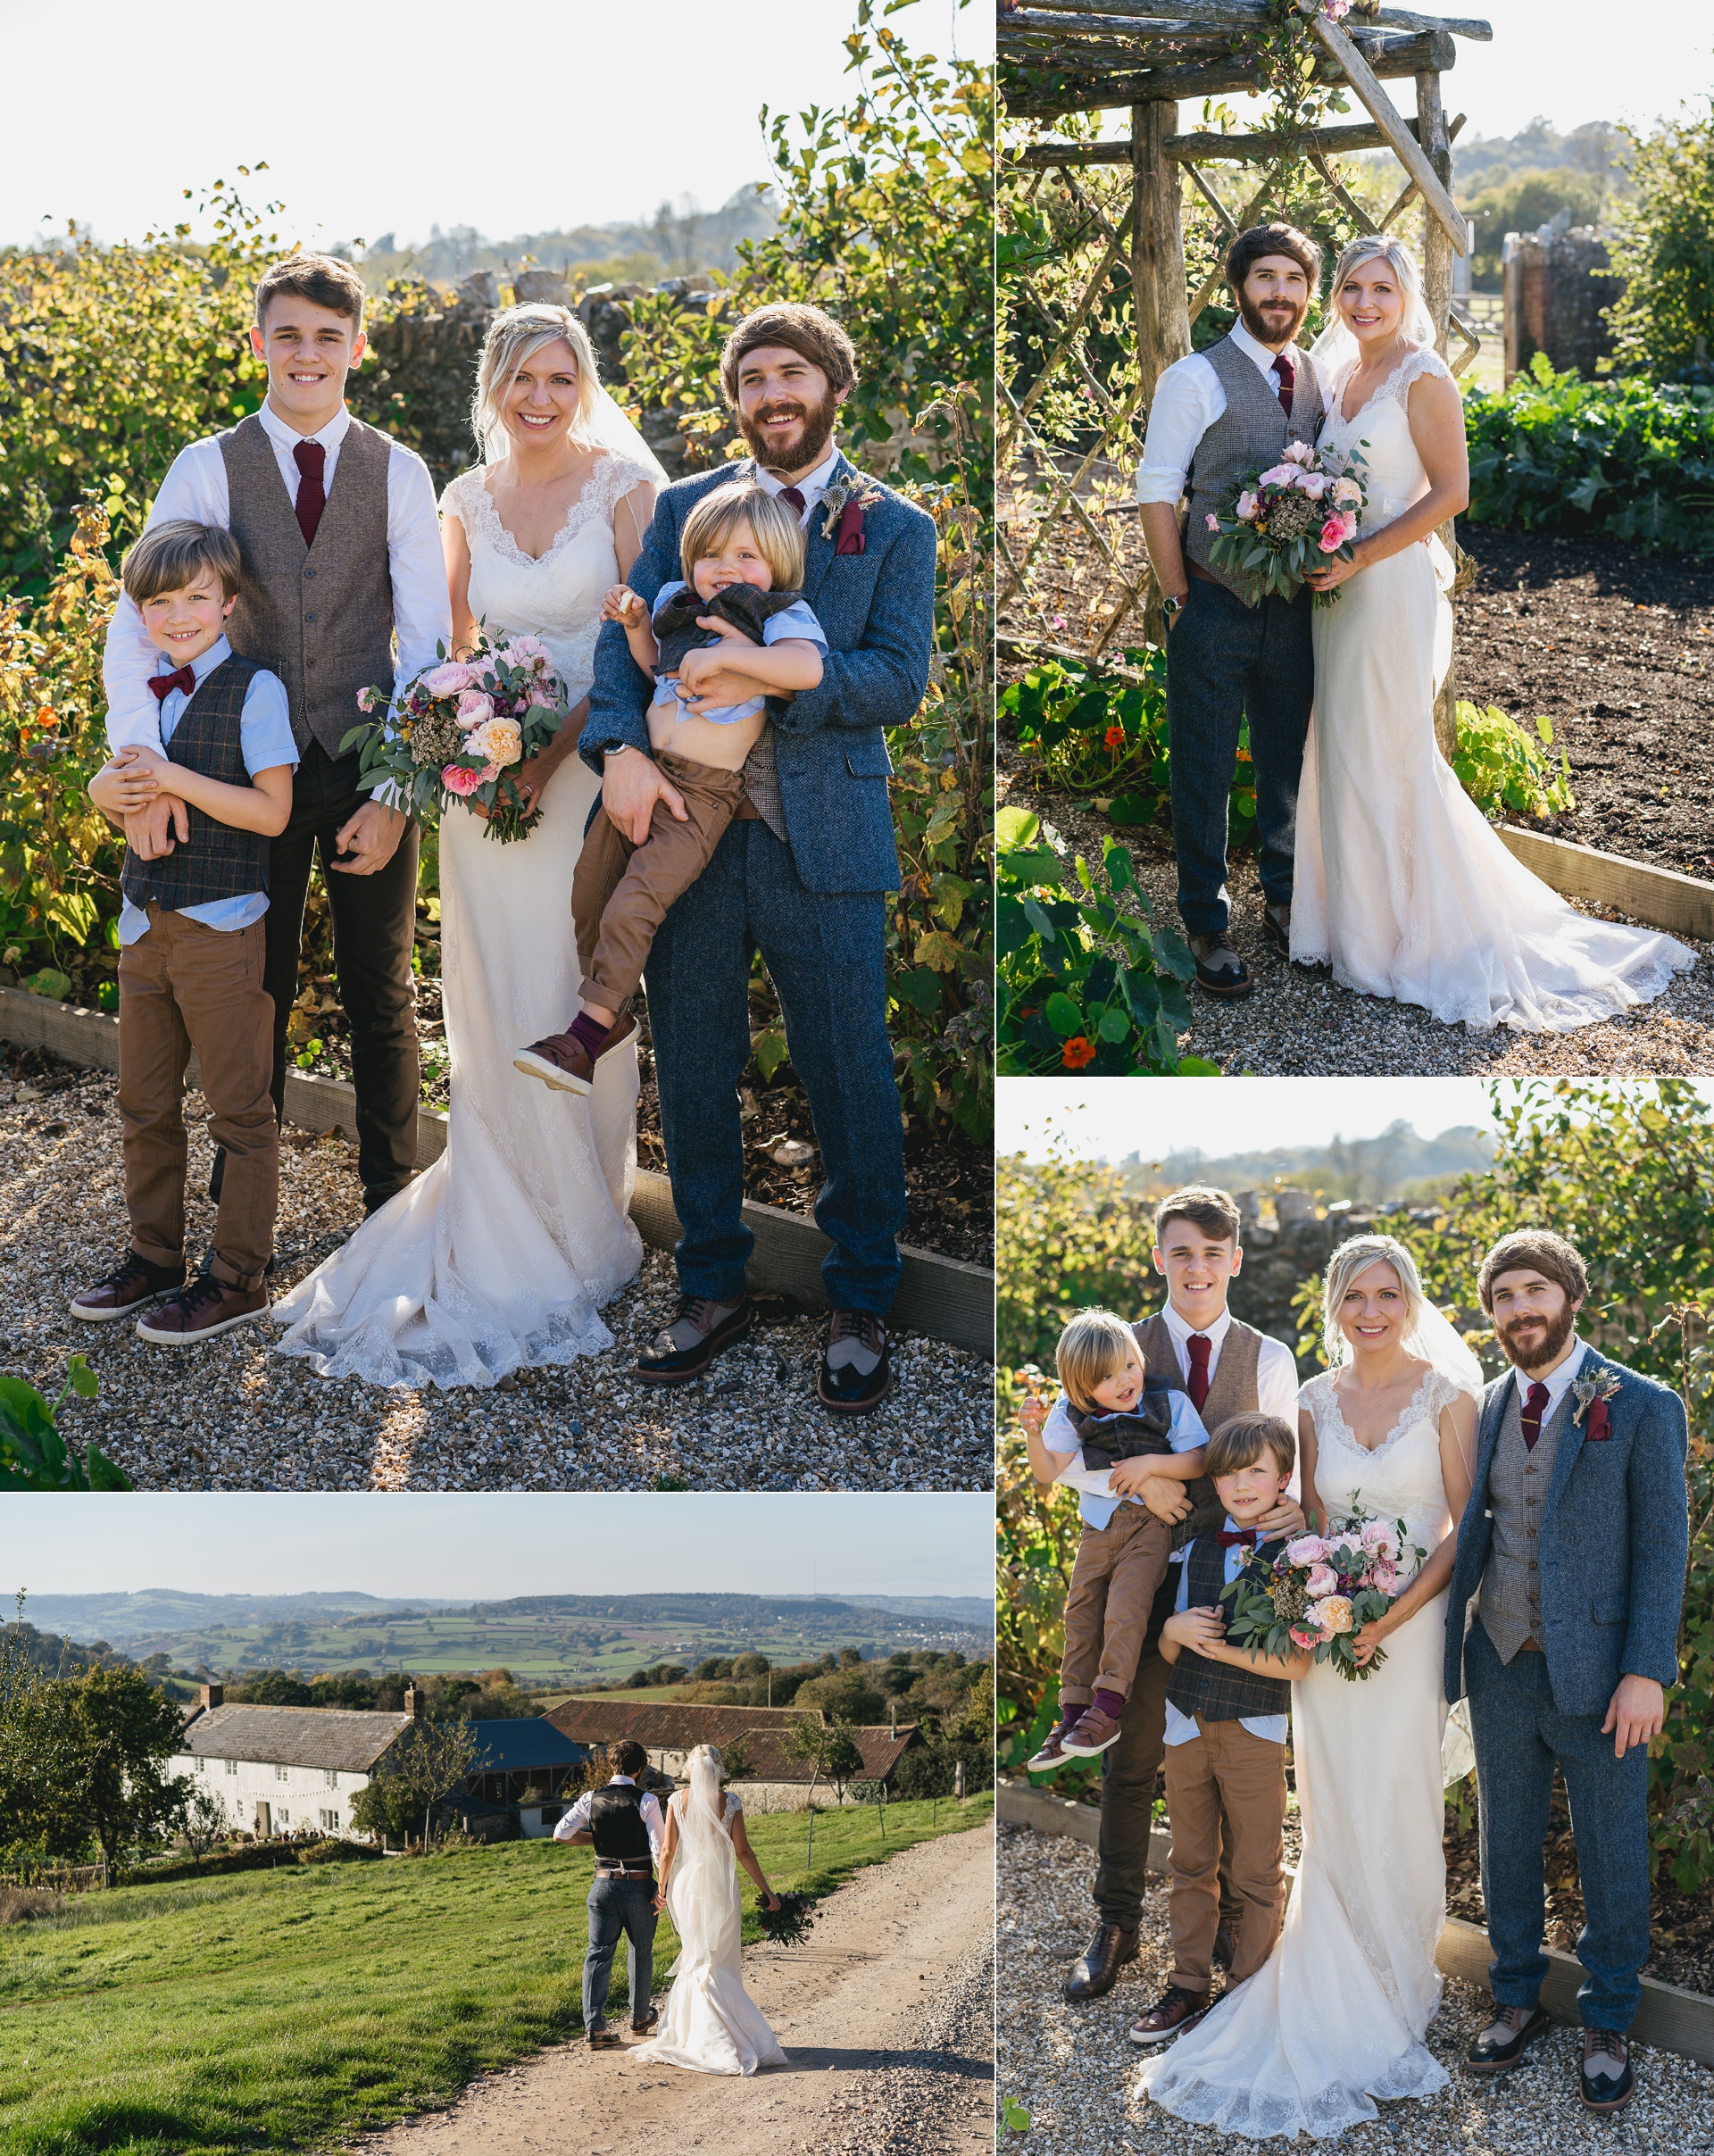 Family portraits of bride and groom with sons